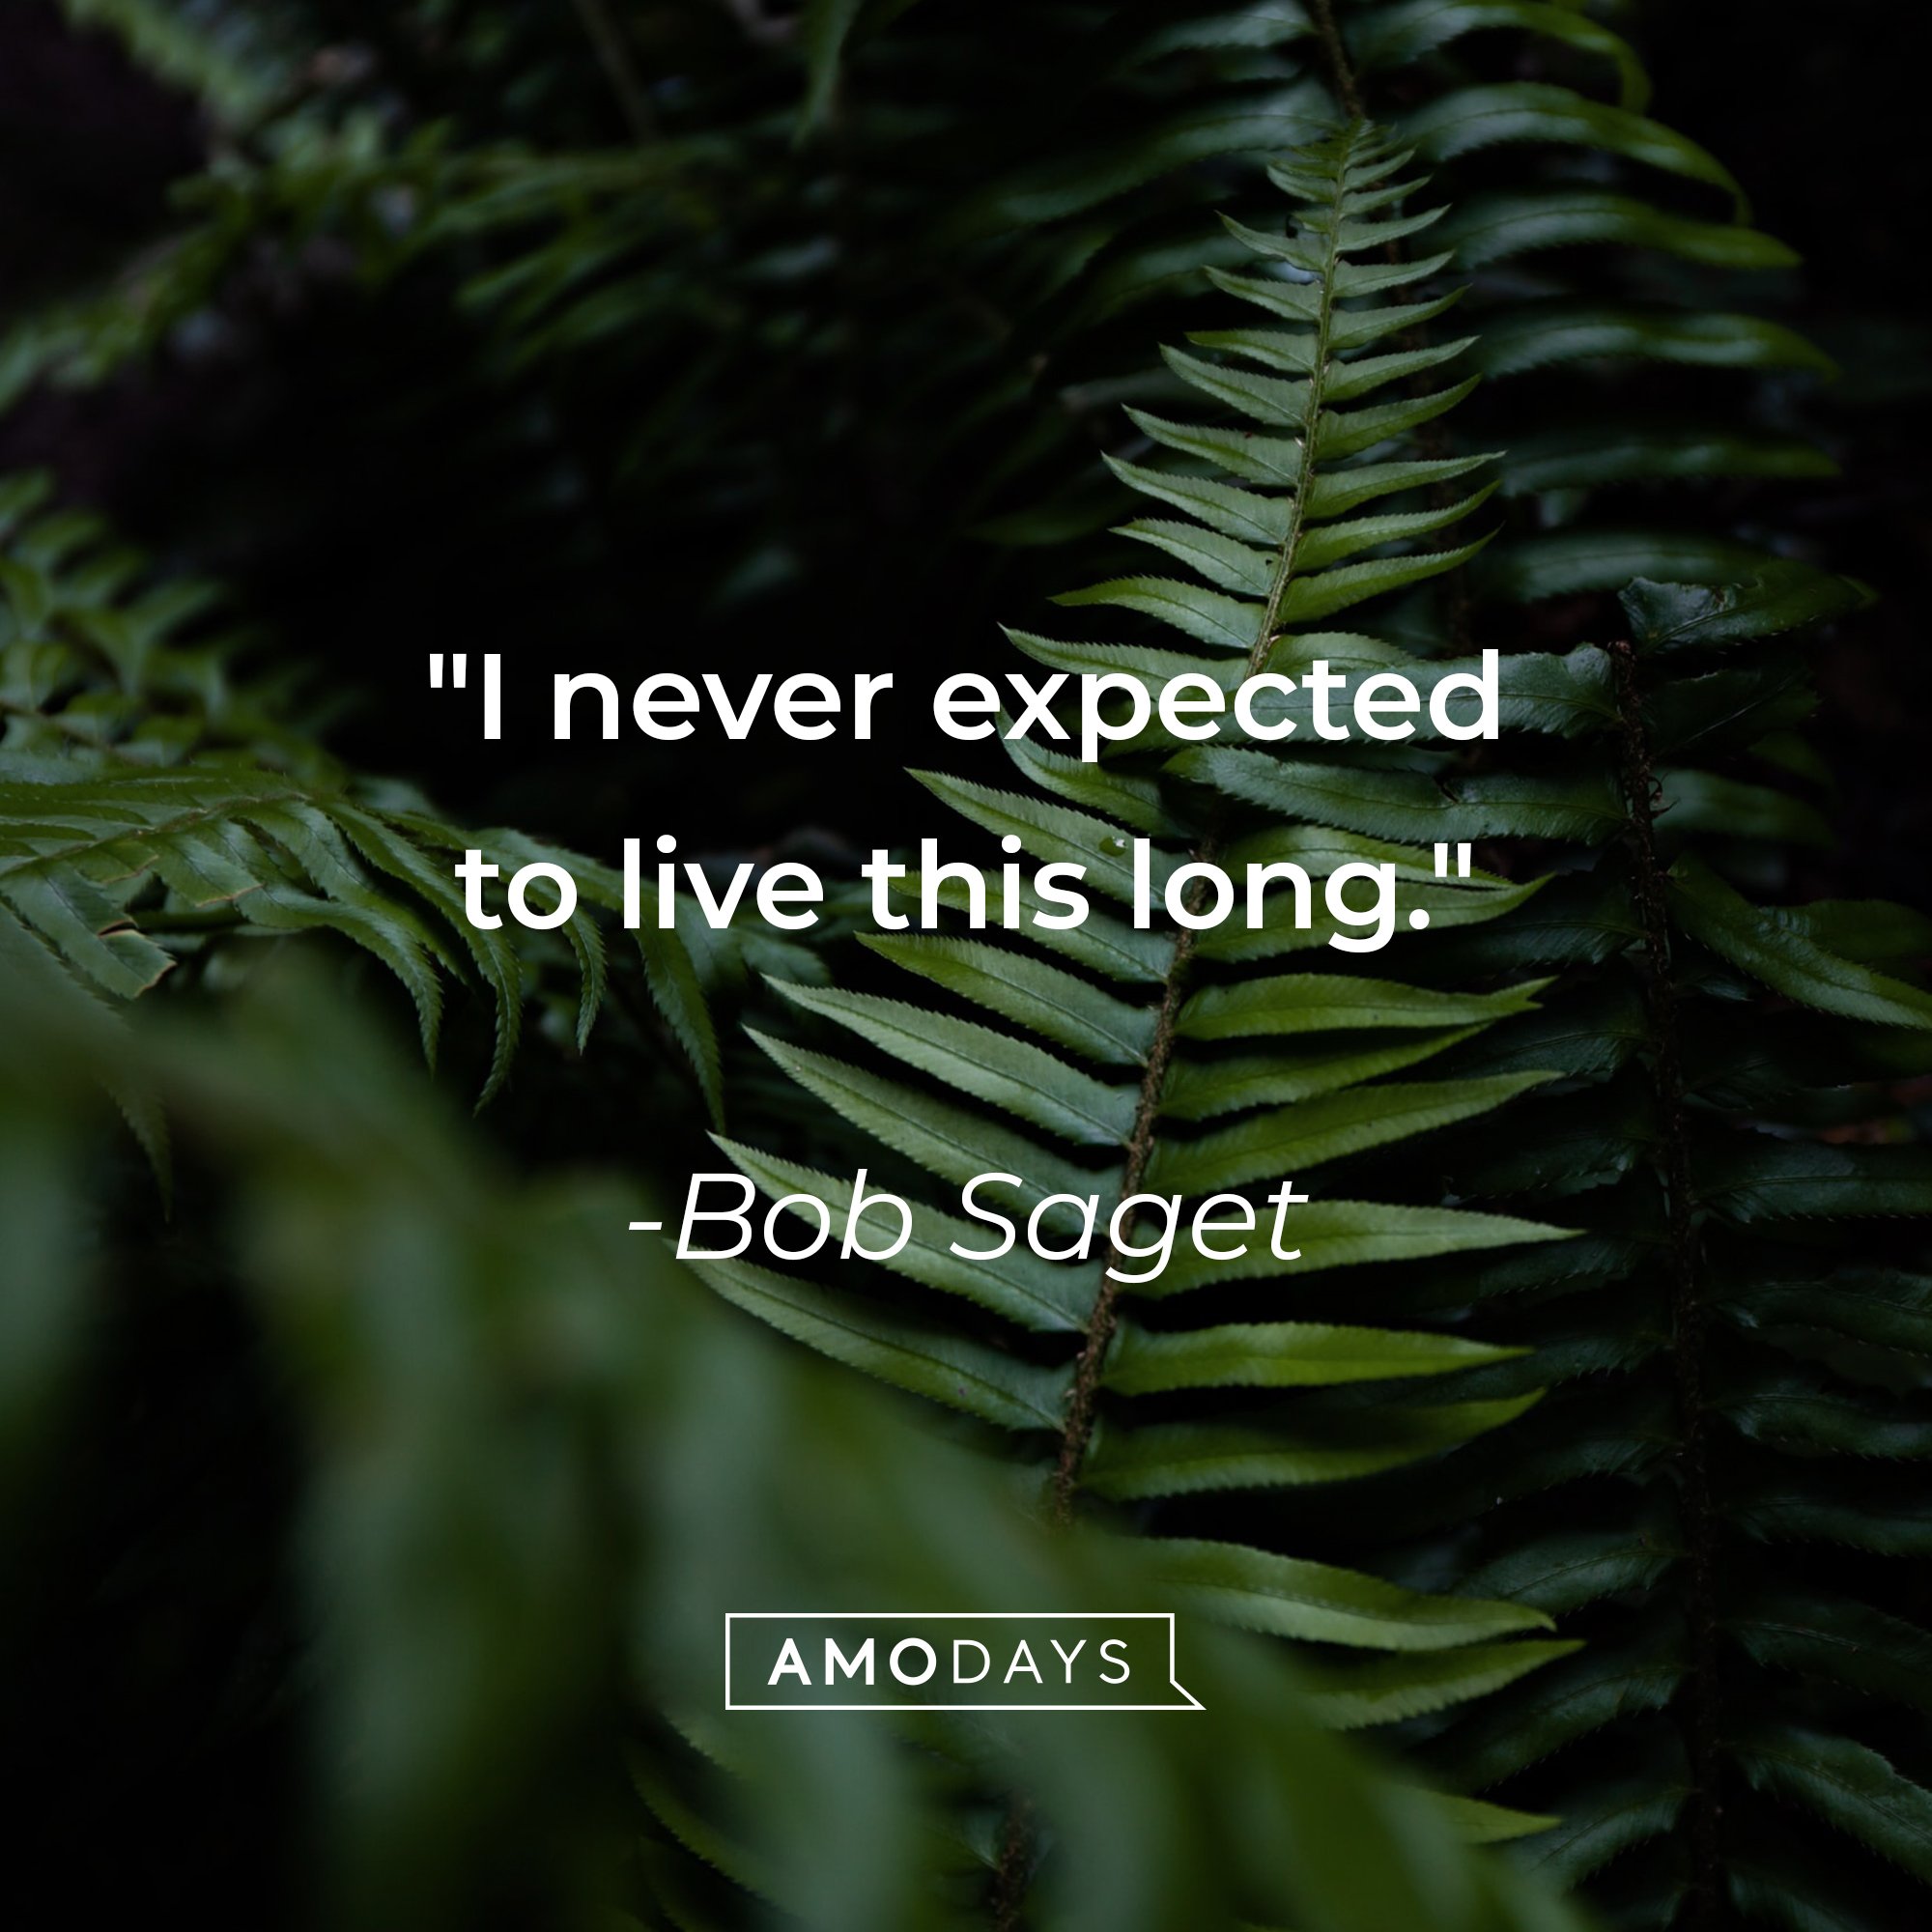 Bob Saget’s quote: "I never expected to live this long." | Image: AmoDays